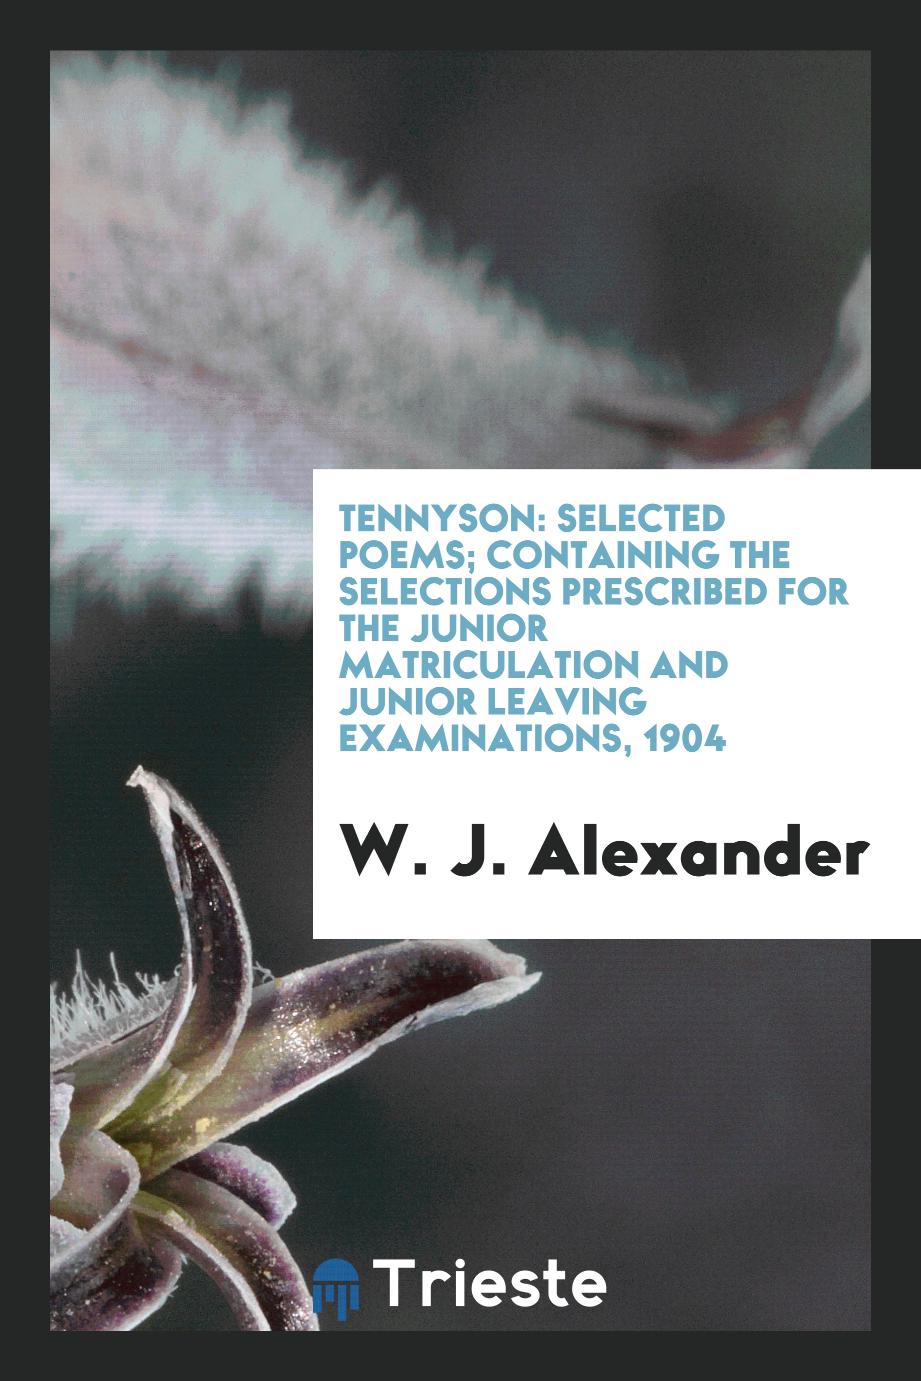 Tennyson: Selected poems; containing the selections prescribed for the Junior Matriculation and Junior Leaving Examinations, 1904